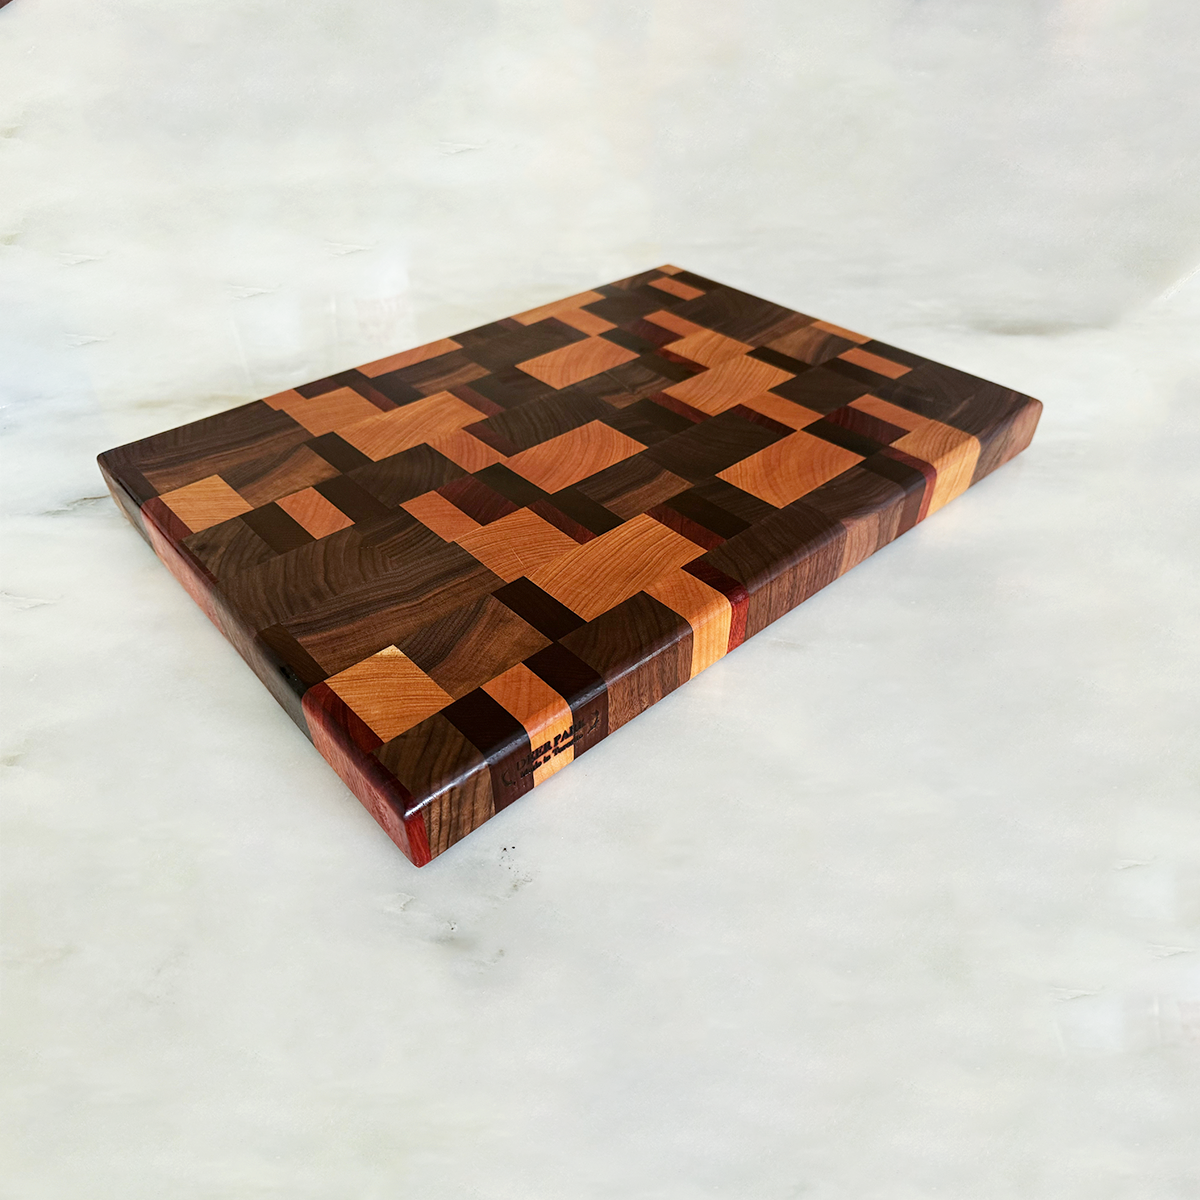 Walnut + Toasted Maple + Cherry + Bloodwood End Grain Cutting Board "The Lonsdale"